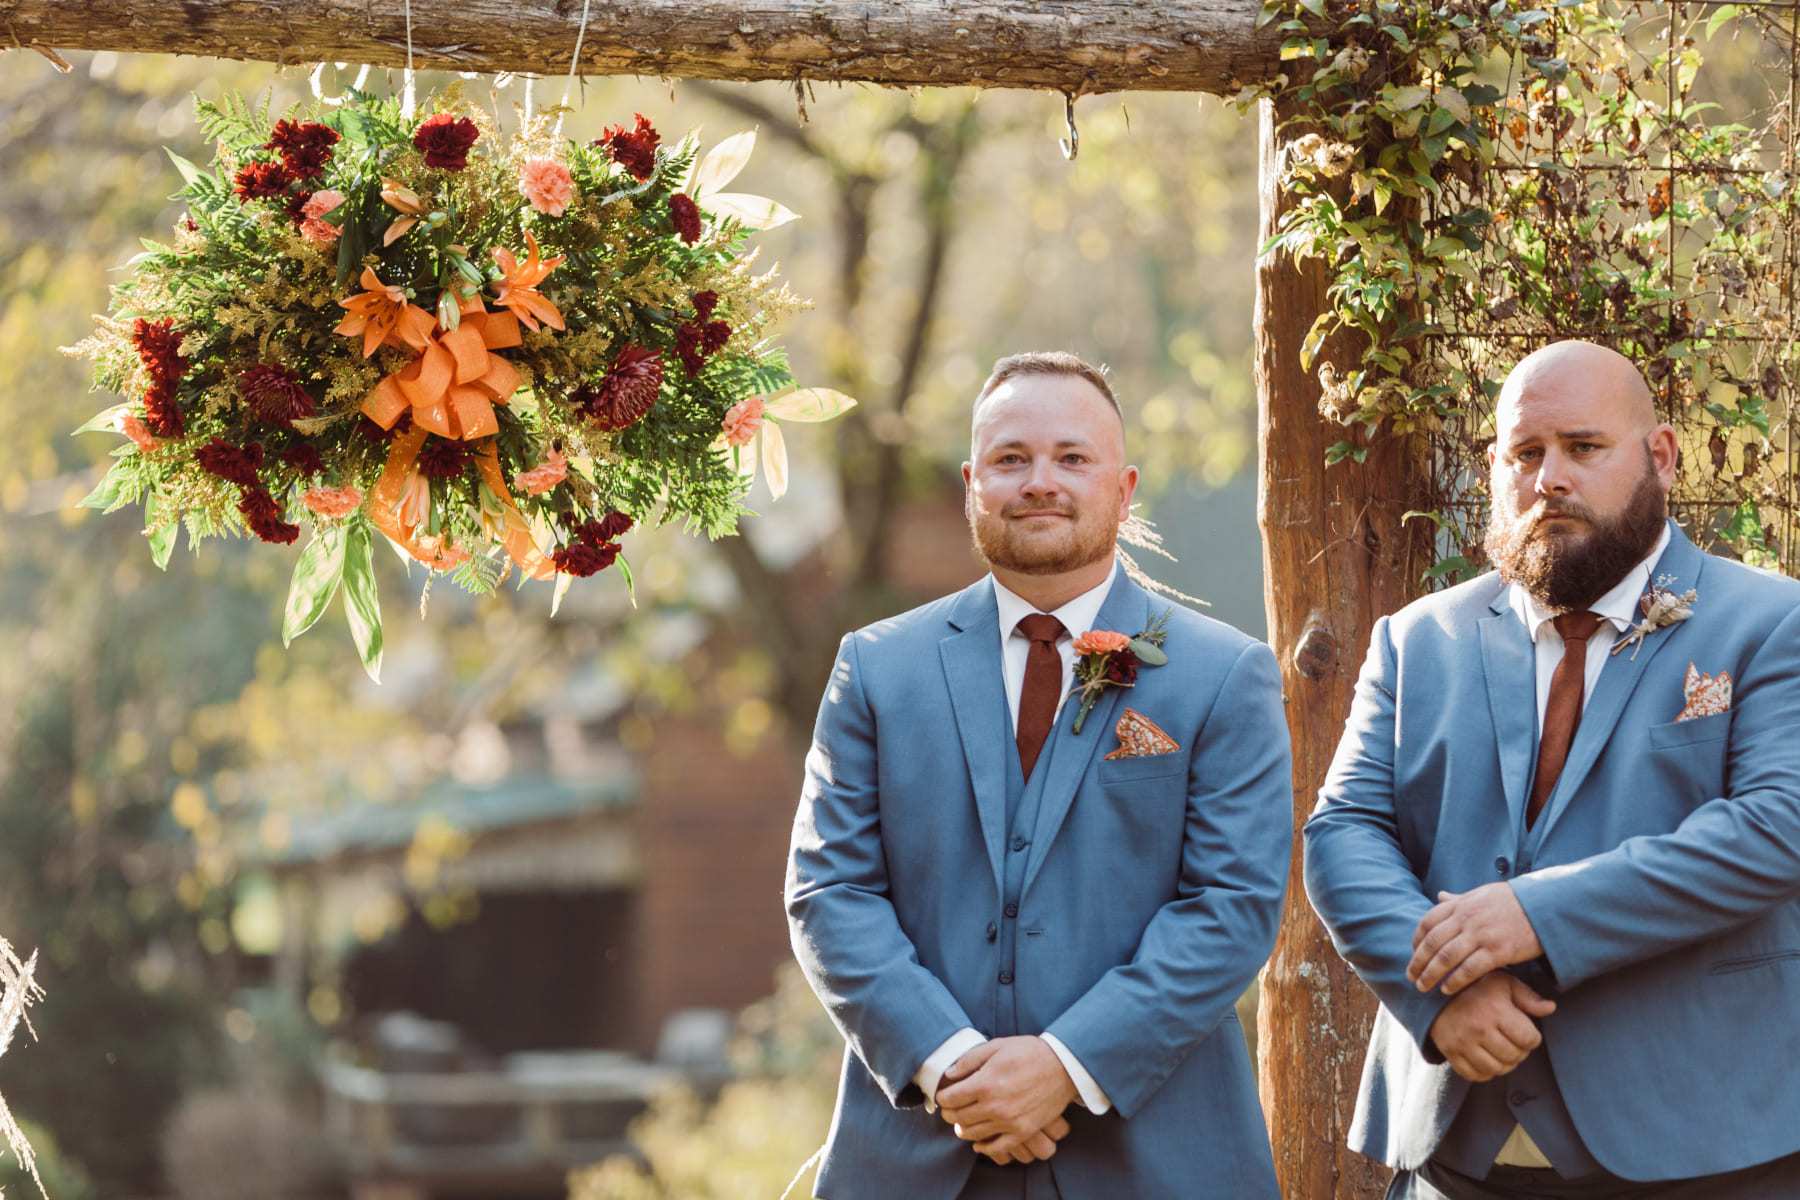 Arch ceremony with enhanced floral decor